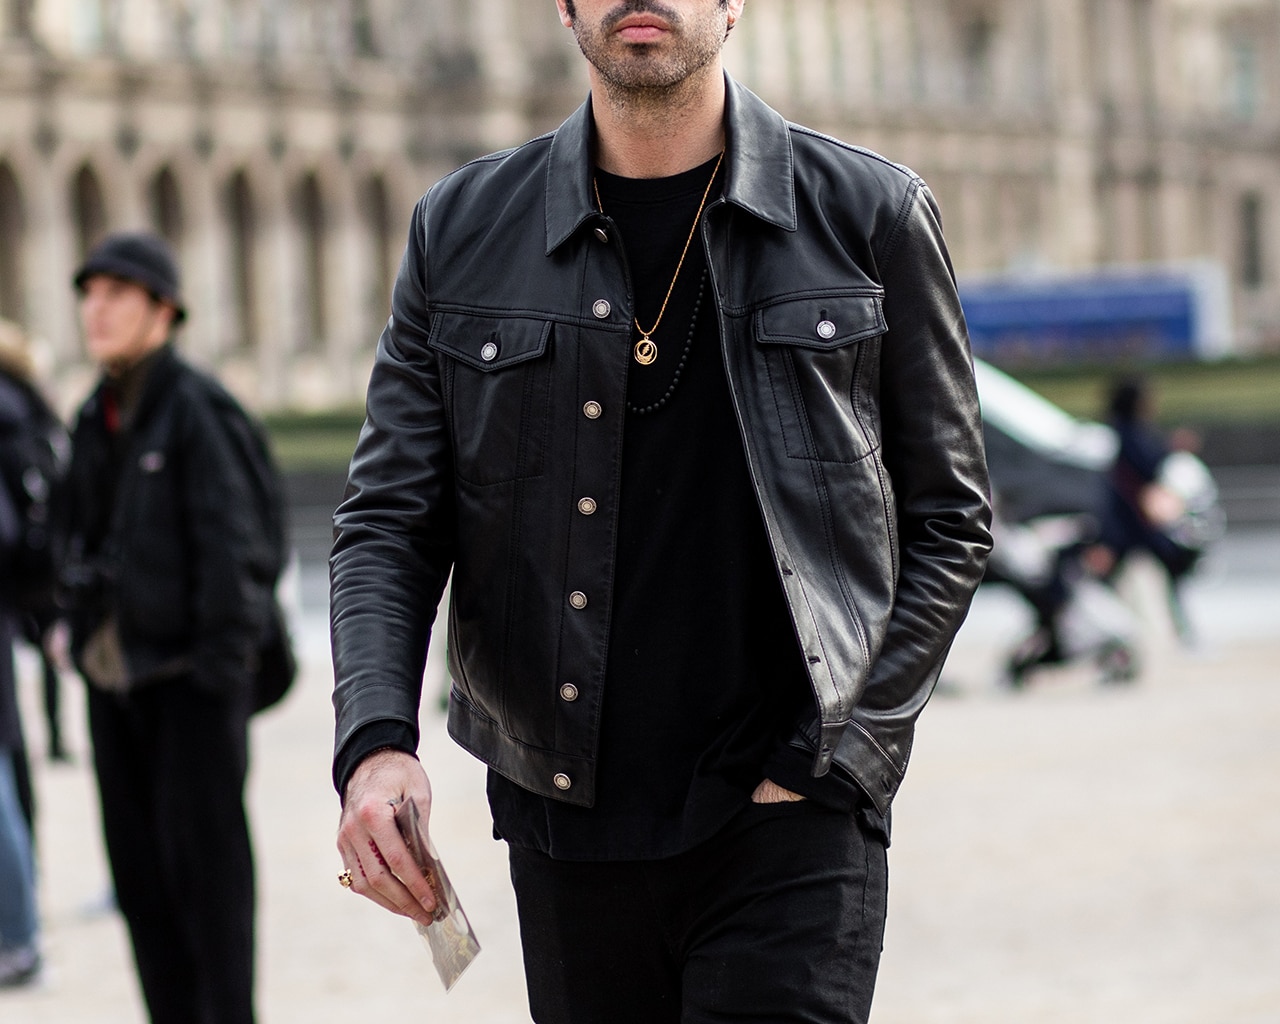 From Bomber To Biker: The Ultimate Guide To Leather Jackets | The Journal |  MR PORTER